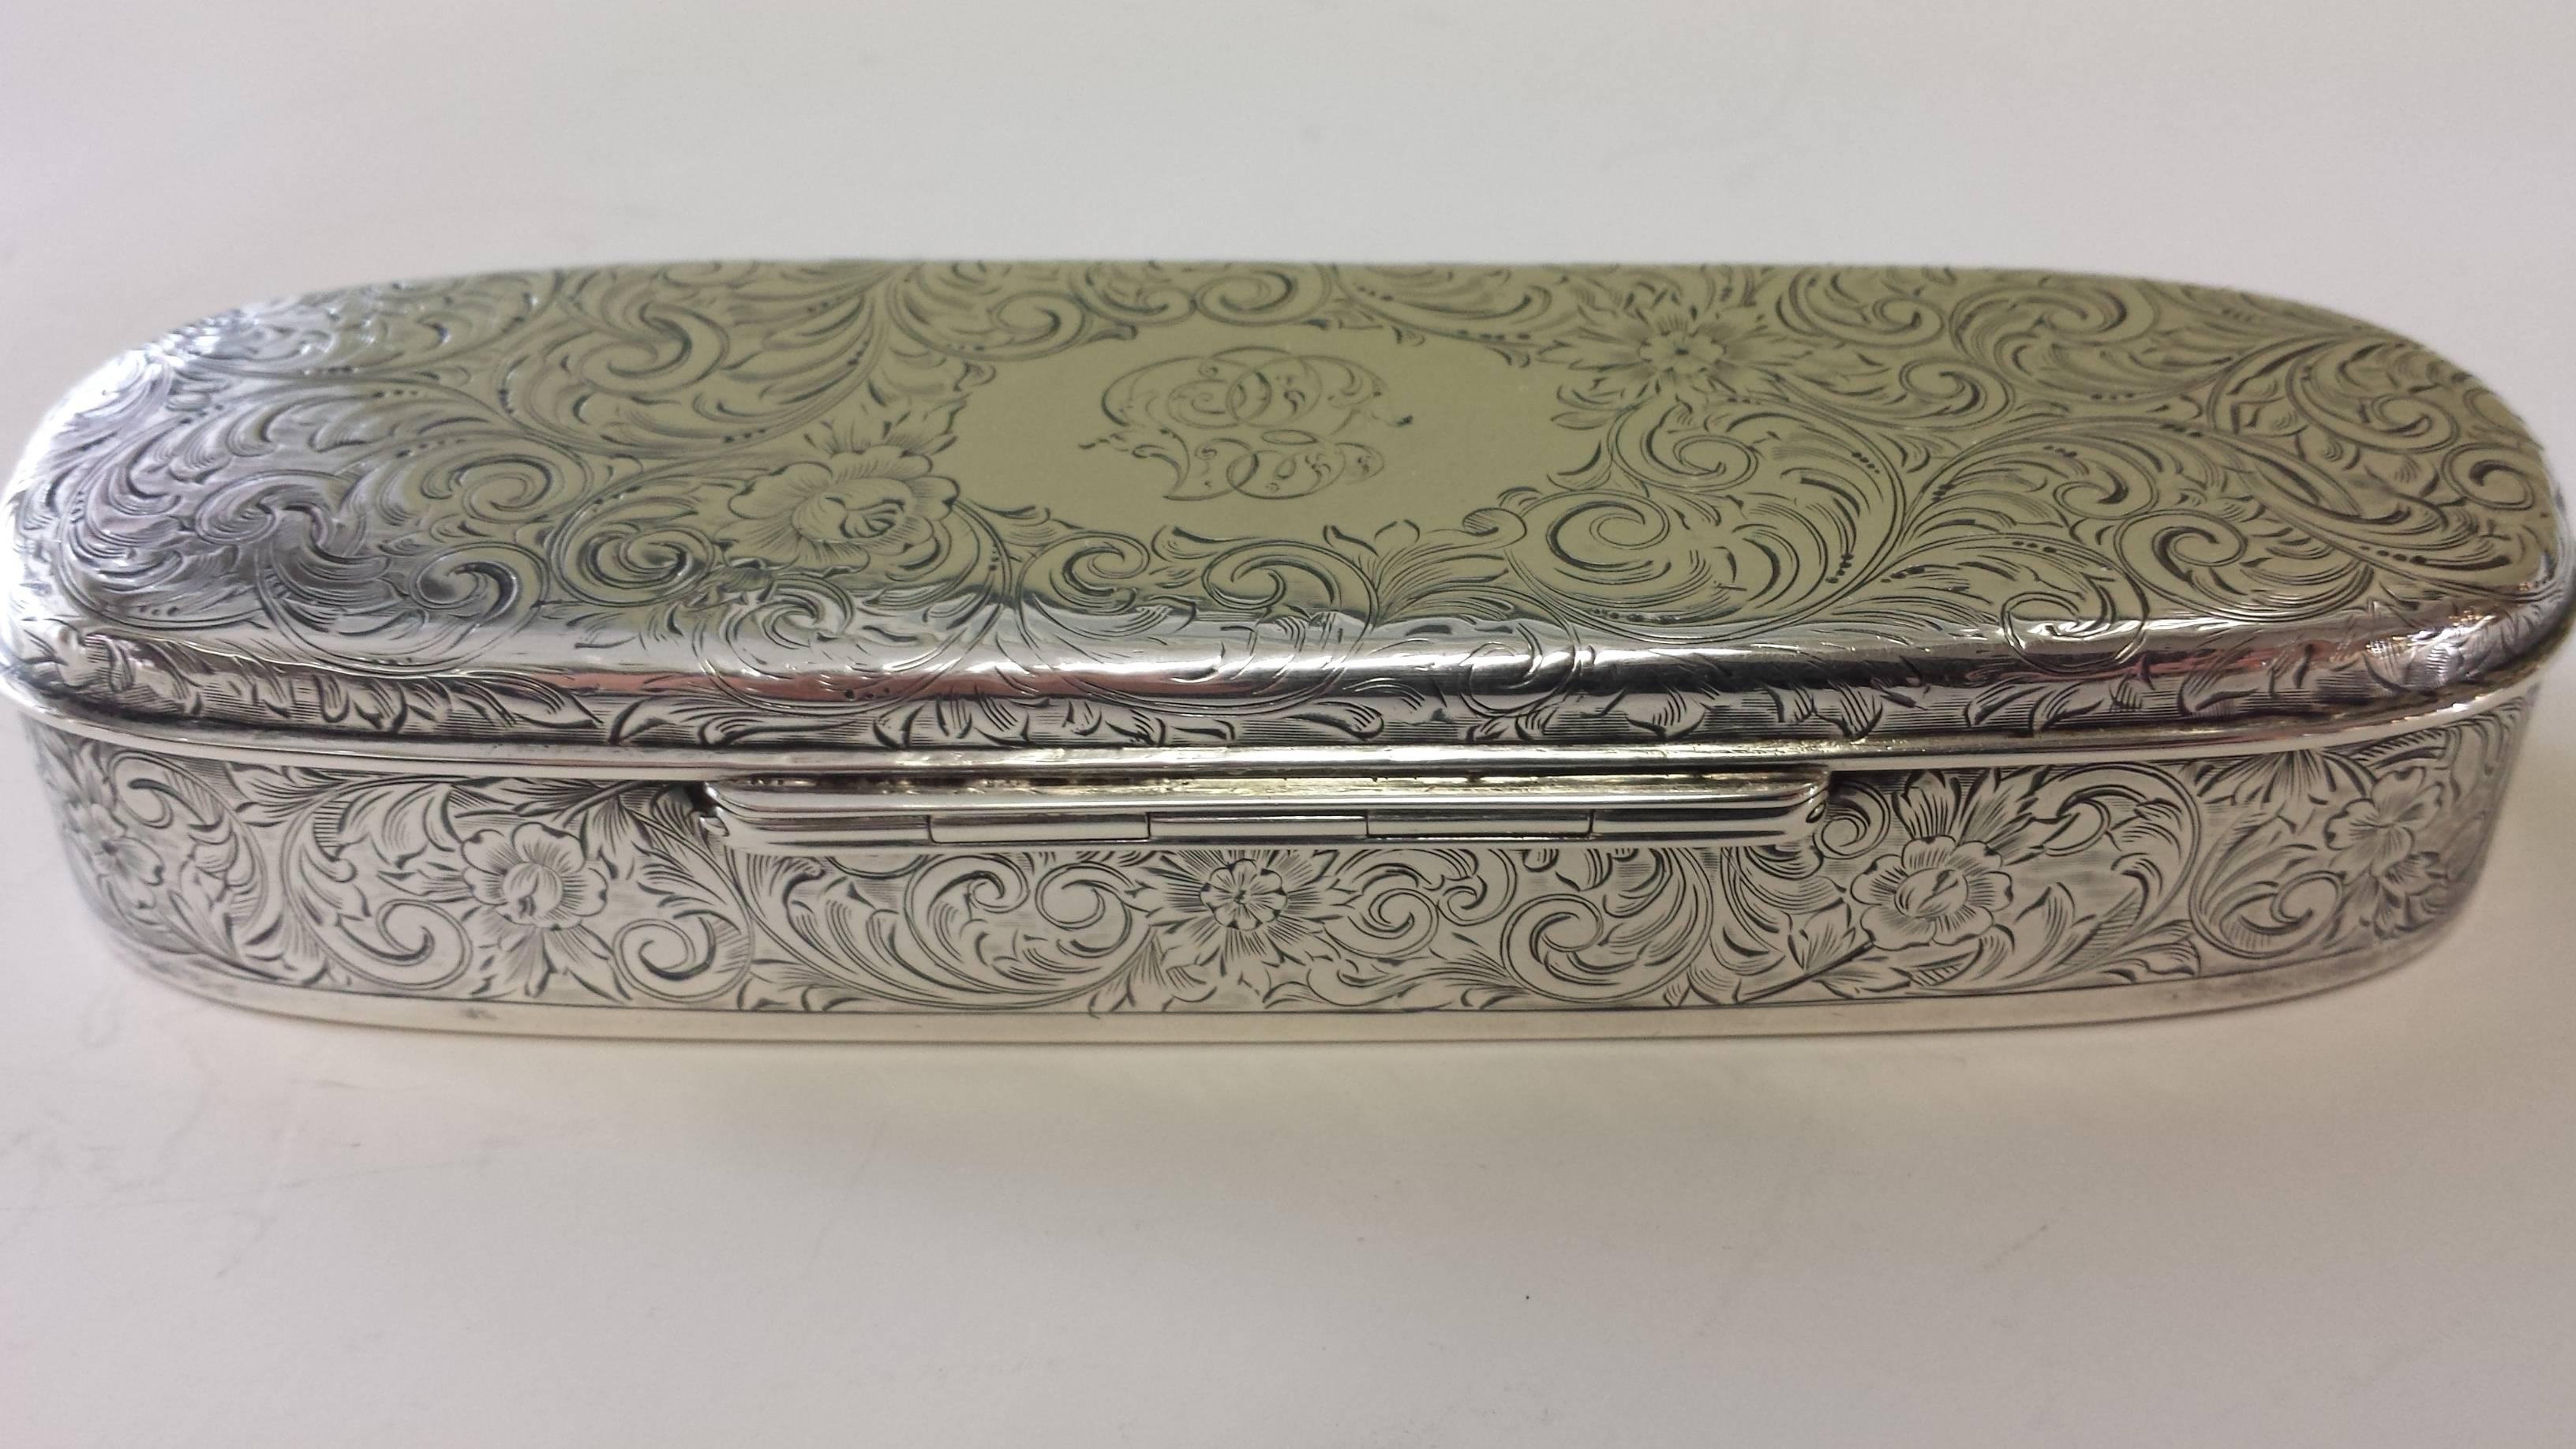 Black, Starr & Frost Sterling Silver Glasses Case, America's First Jeweler, Marked on bottom Black, Starr & Frost, New York, and eagle monogram, (please see all pics), The case is engraved on all sides and has a top monogram, The interior is